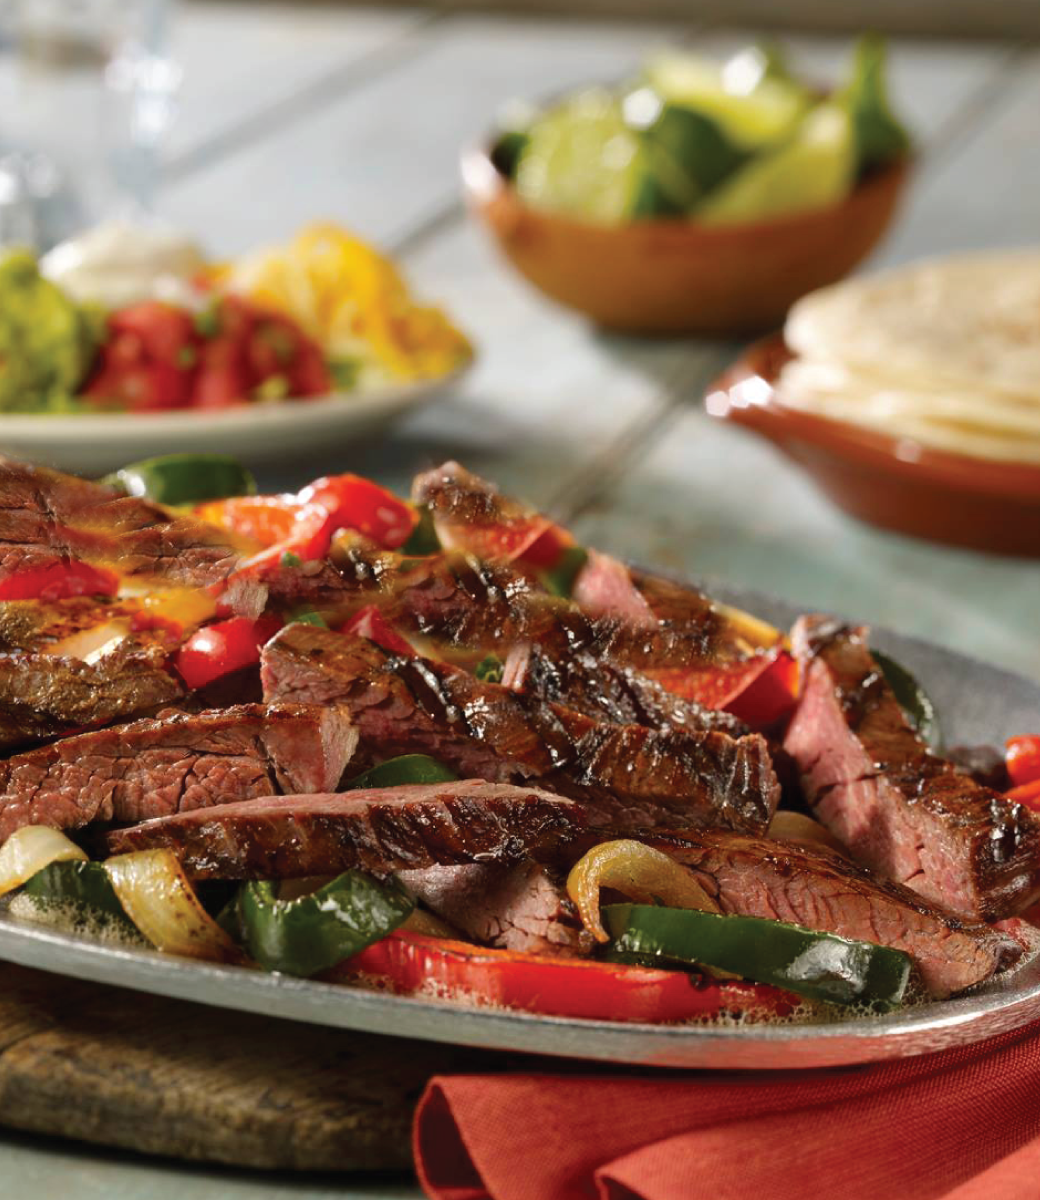 Steak fajitas with sides, limes and tortillas on the table